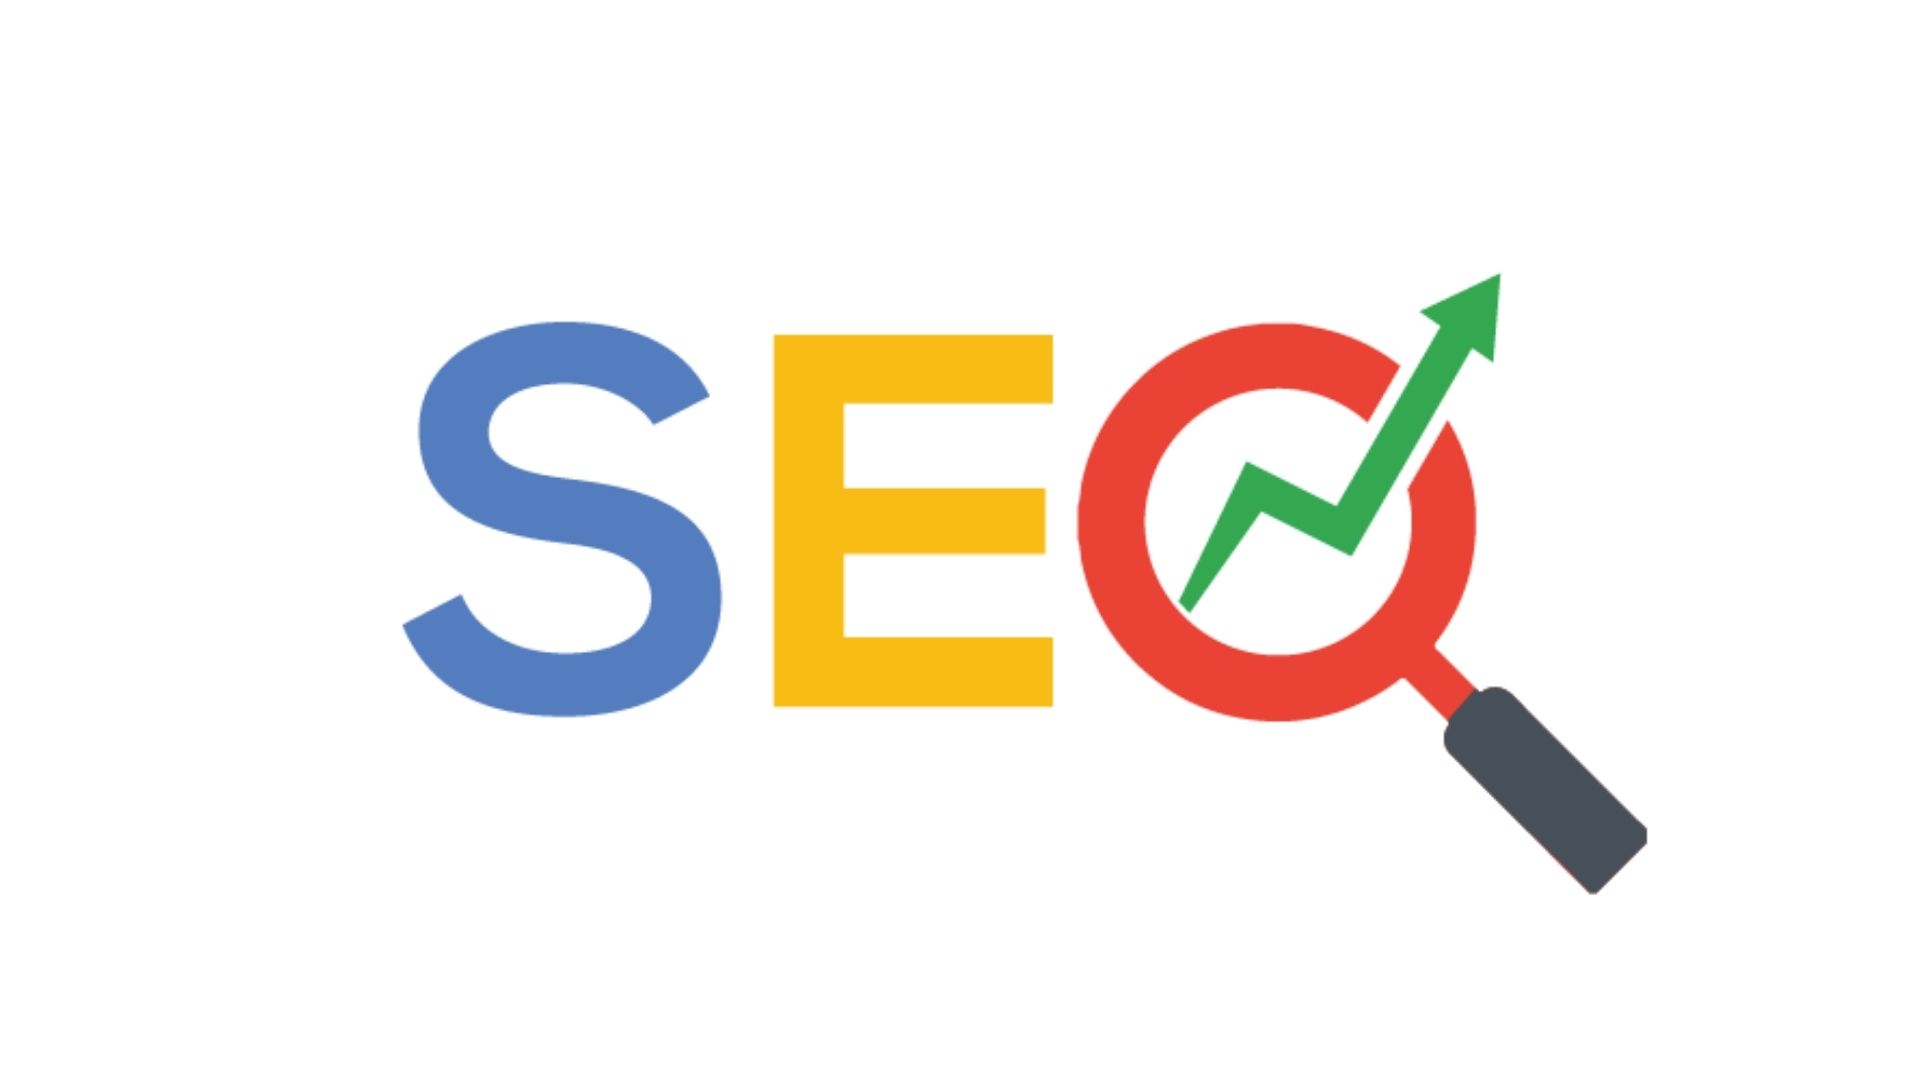 You might wonder how to get SEO clients, and you will need to learn more about how to do it, and that is why we prepared this guide.